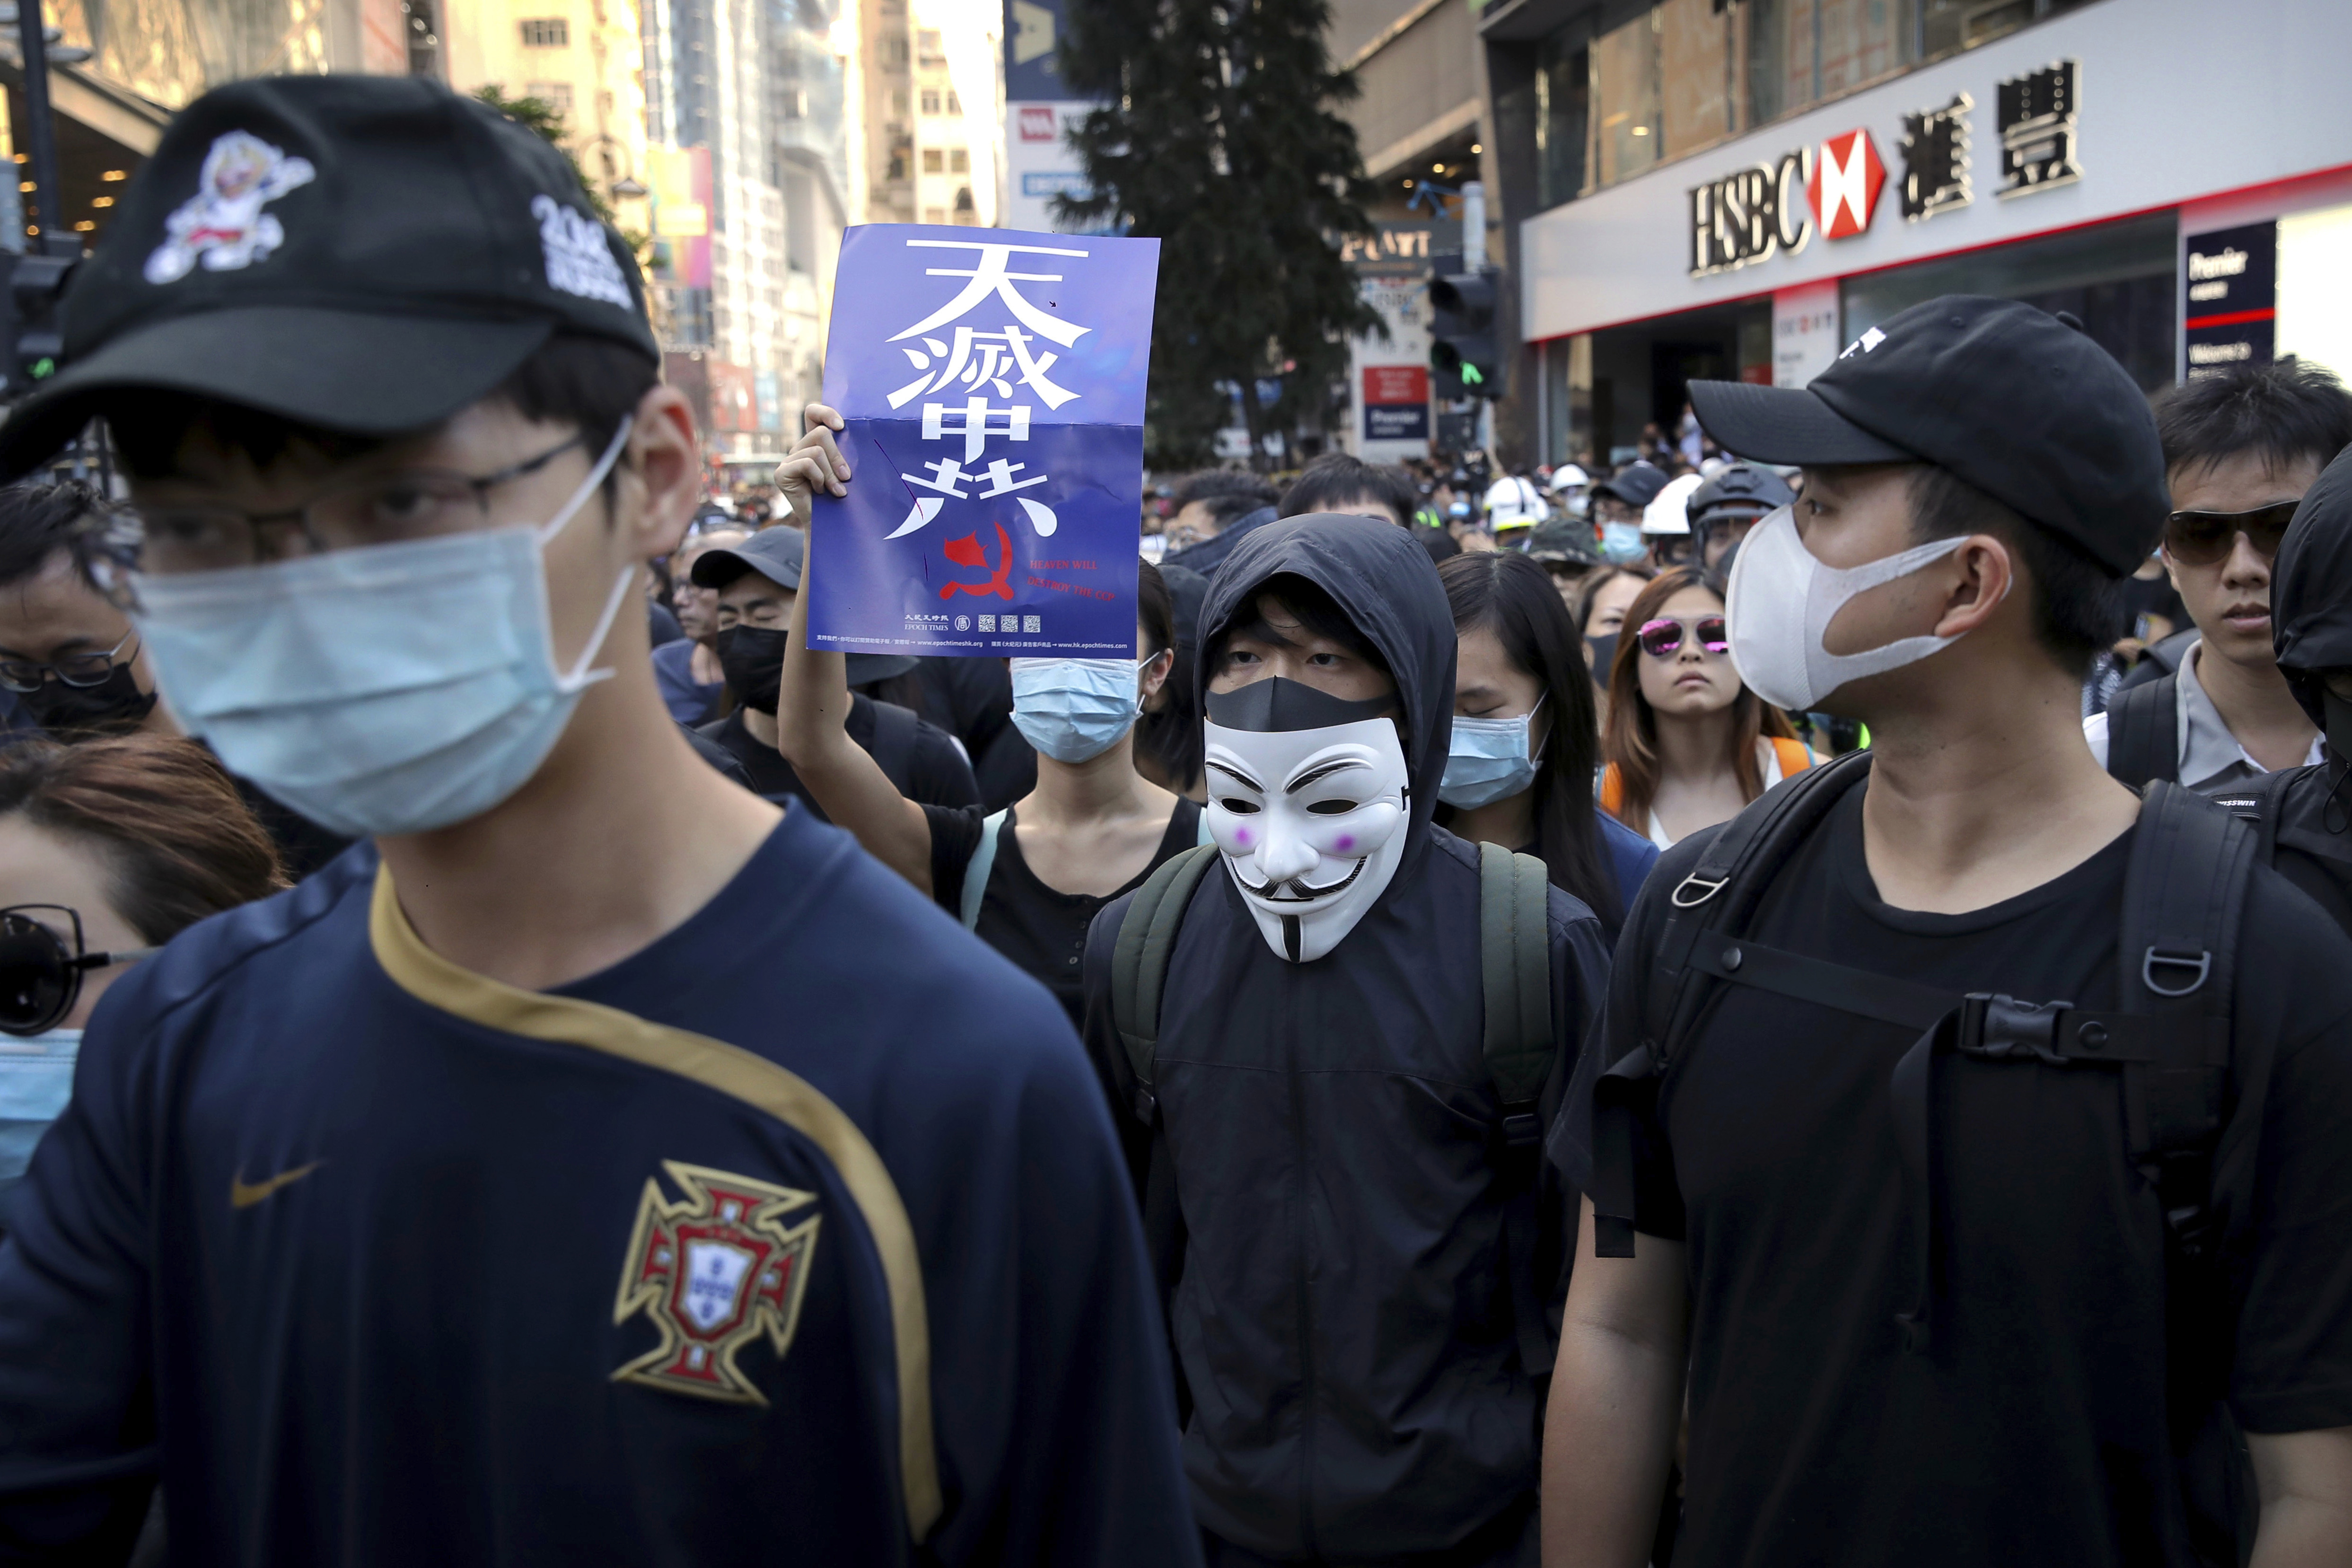 Demonstrators wearing masks gather during an anti-government protest in Hong Kong, Saturday, Nov. 2, 2019. Defying a police ban, thousands of black-clad masked protesters are streaming into Hong Kong's central shopping district for another rally demanding autonomy in the Chinese territory as Beijing indicated it could tighten its grip. (AP Photo/Kin Cheung)